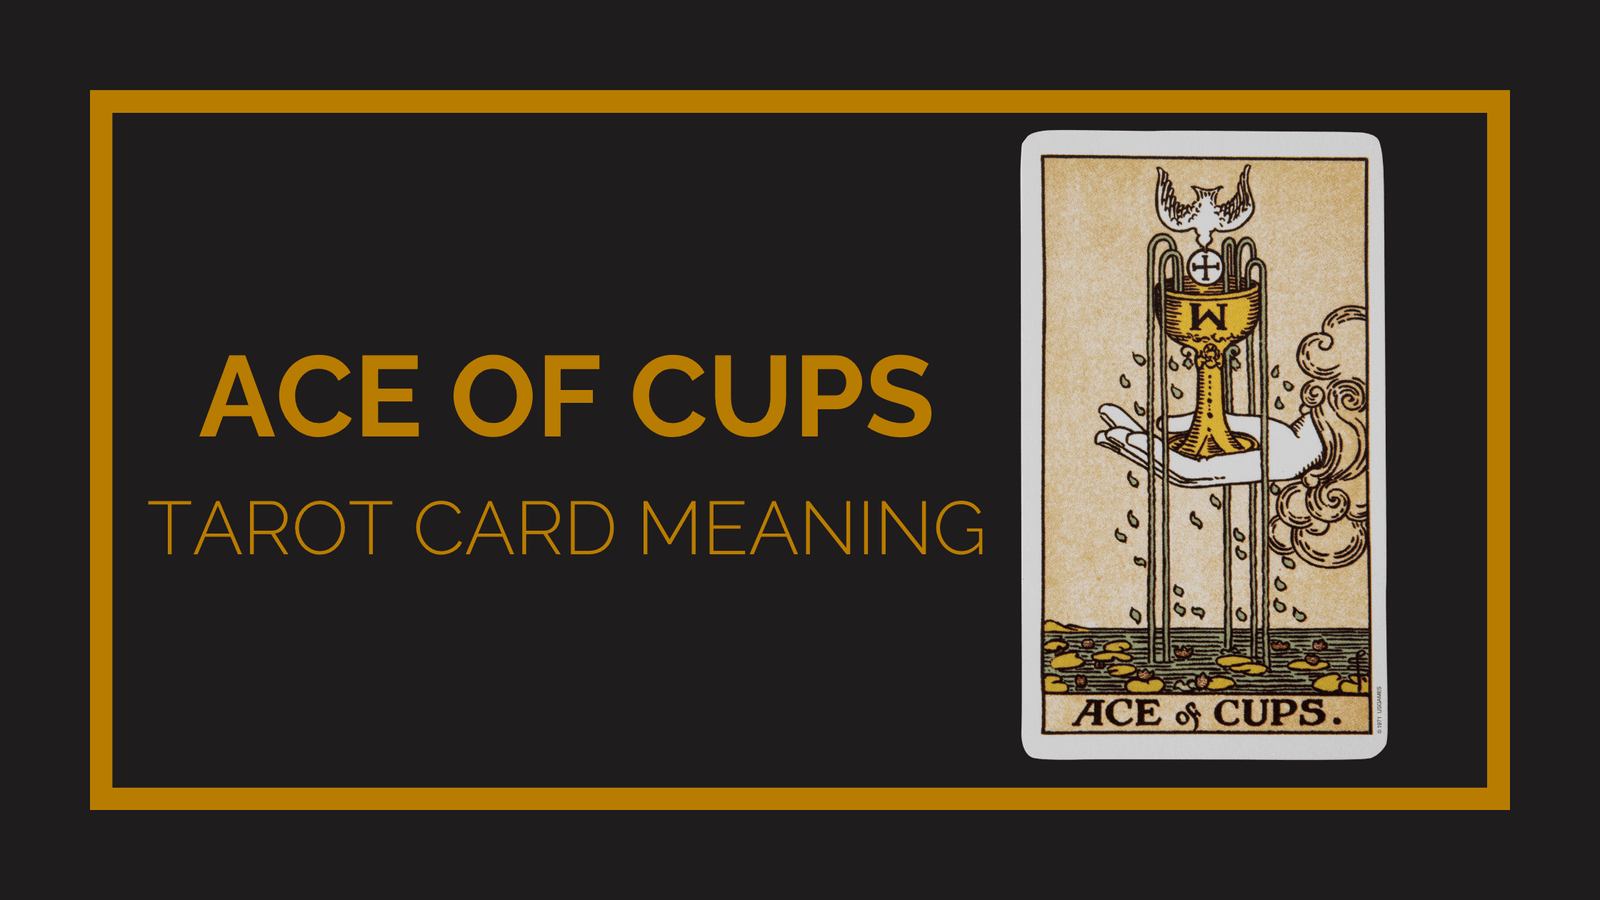 Ace of cups tarot card meaning | tarot with gord